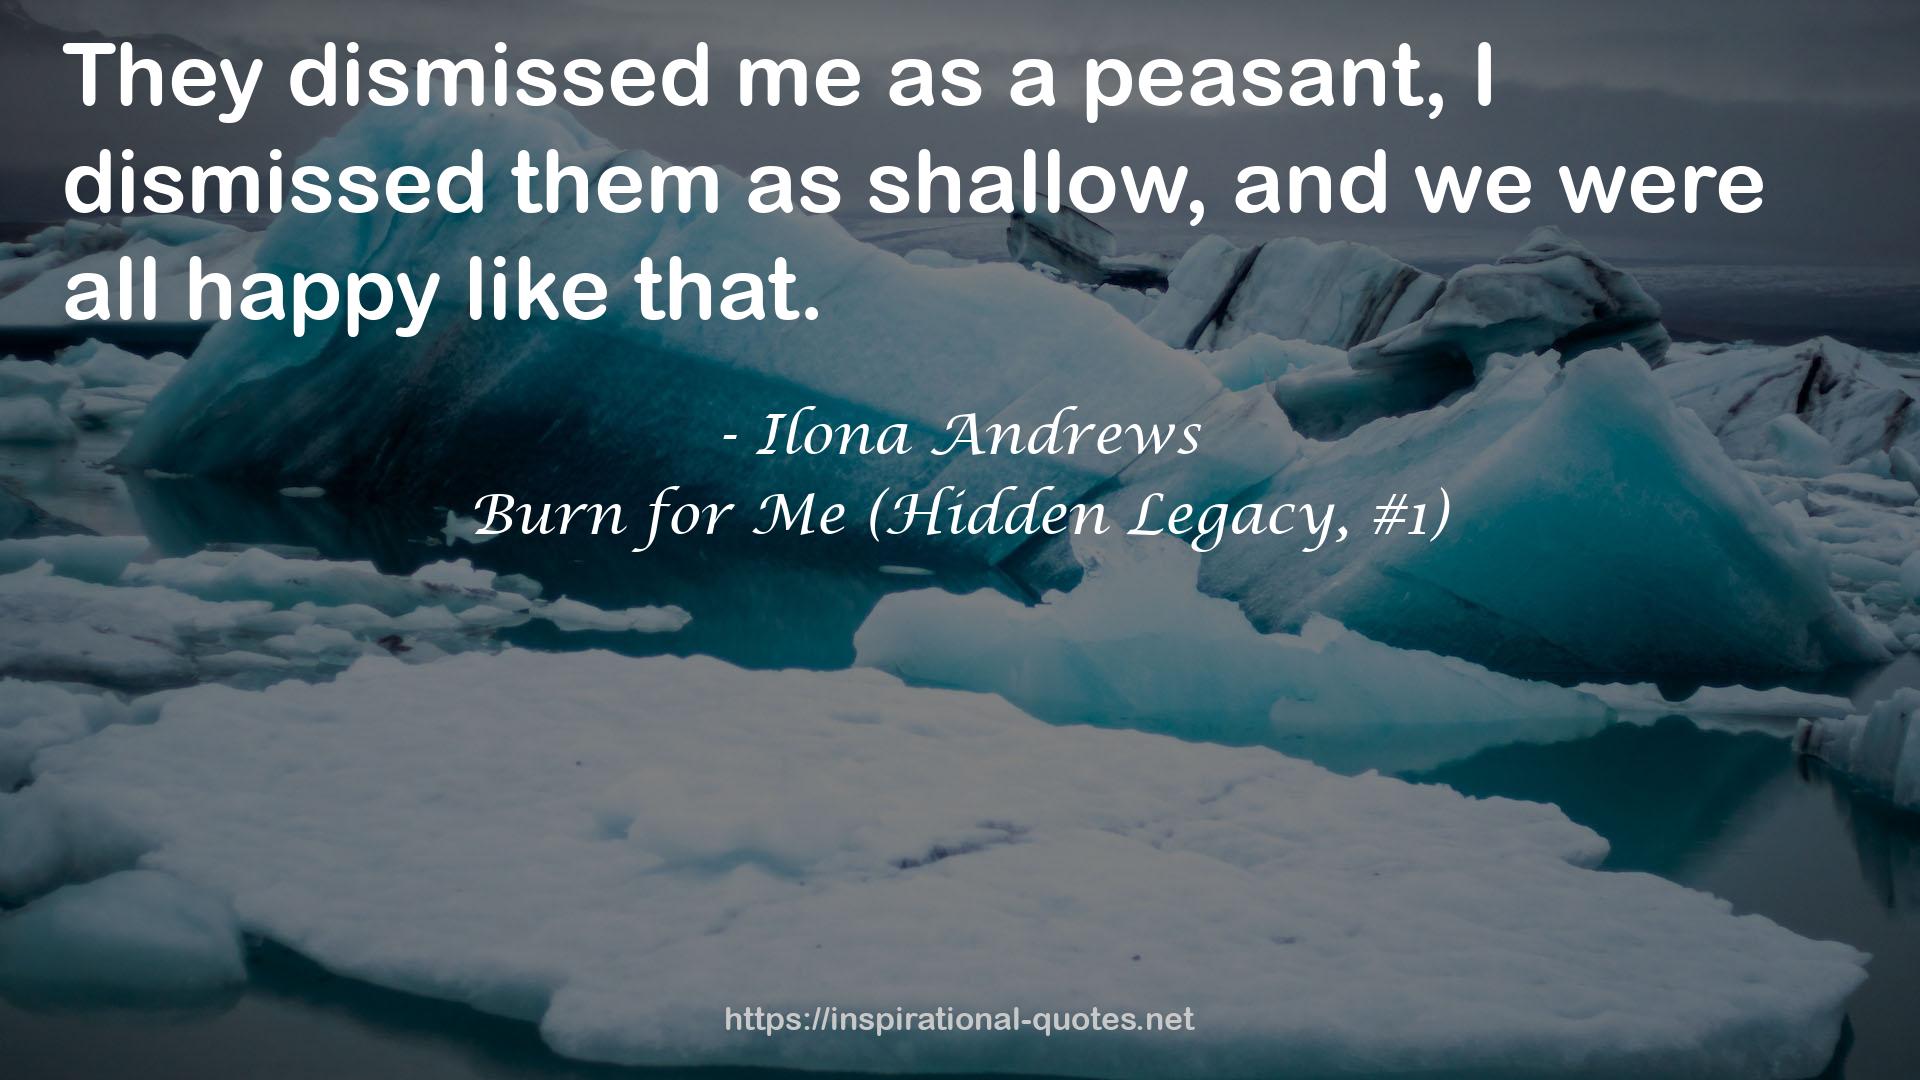 Burn for Me (Hidden Legacy, #1) QUOTES